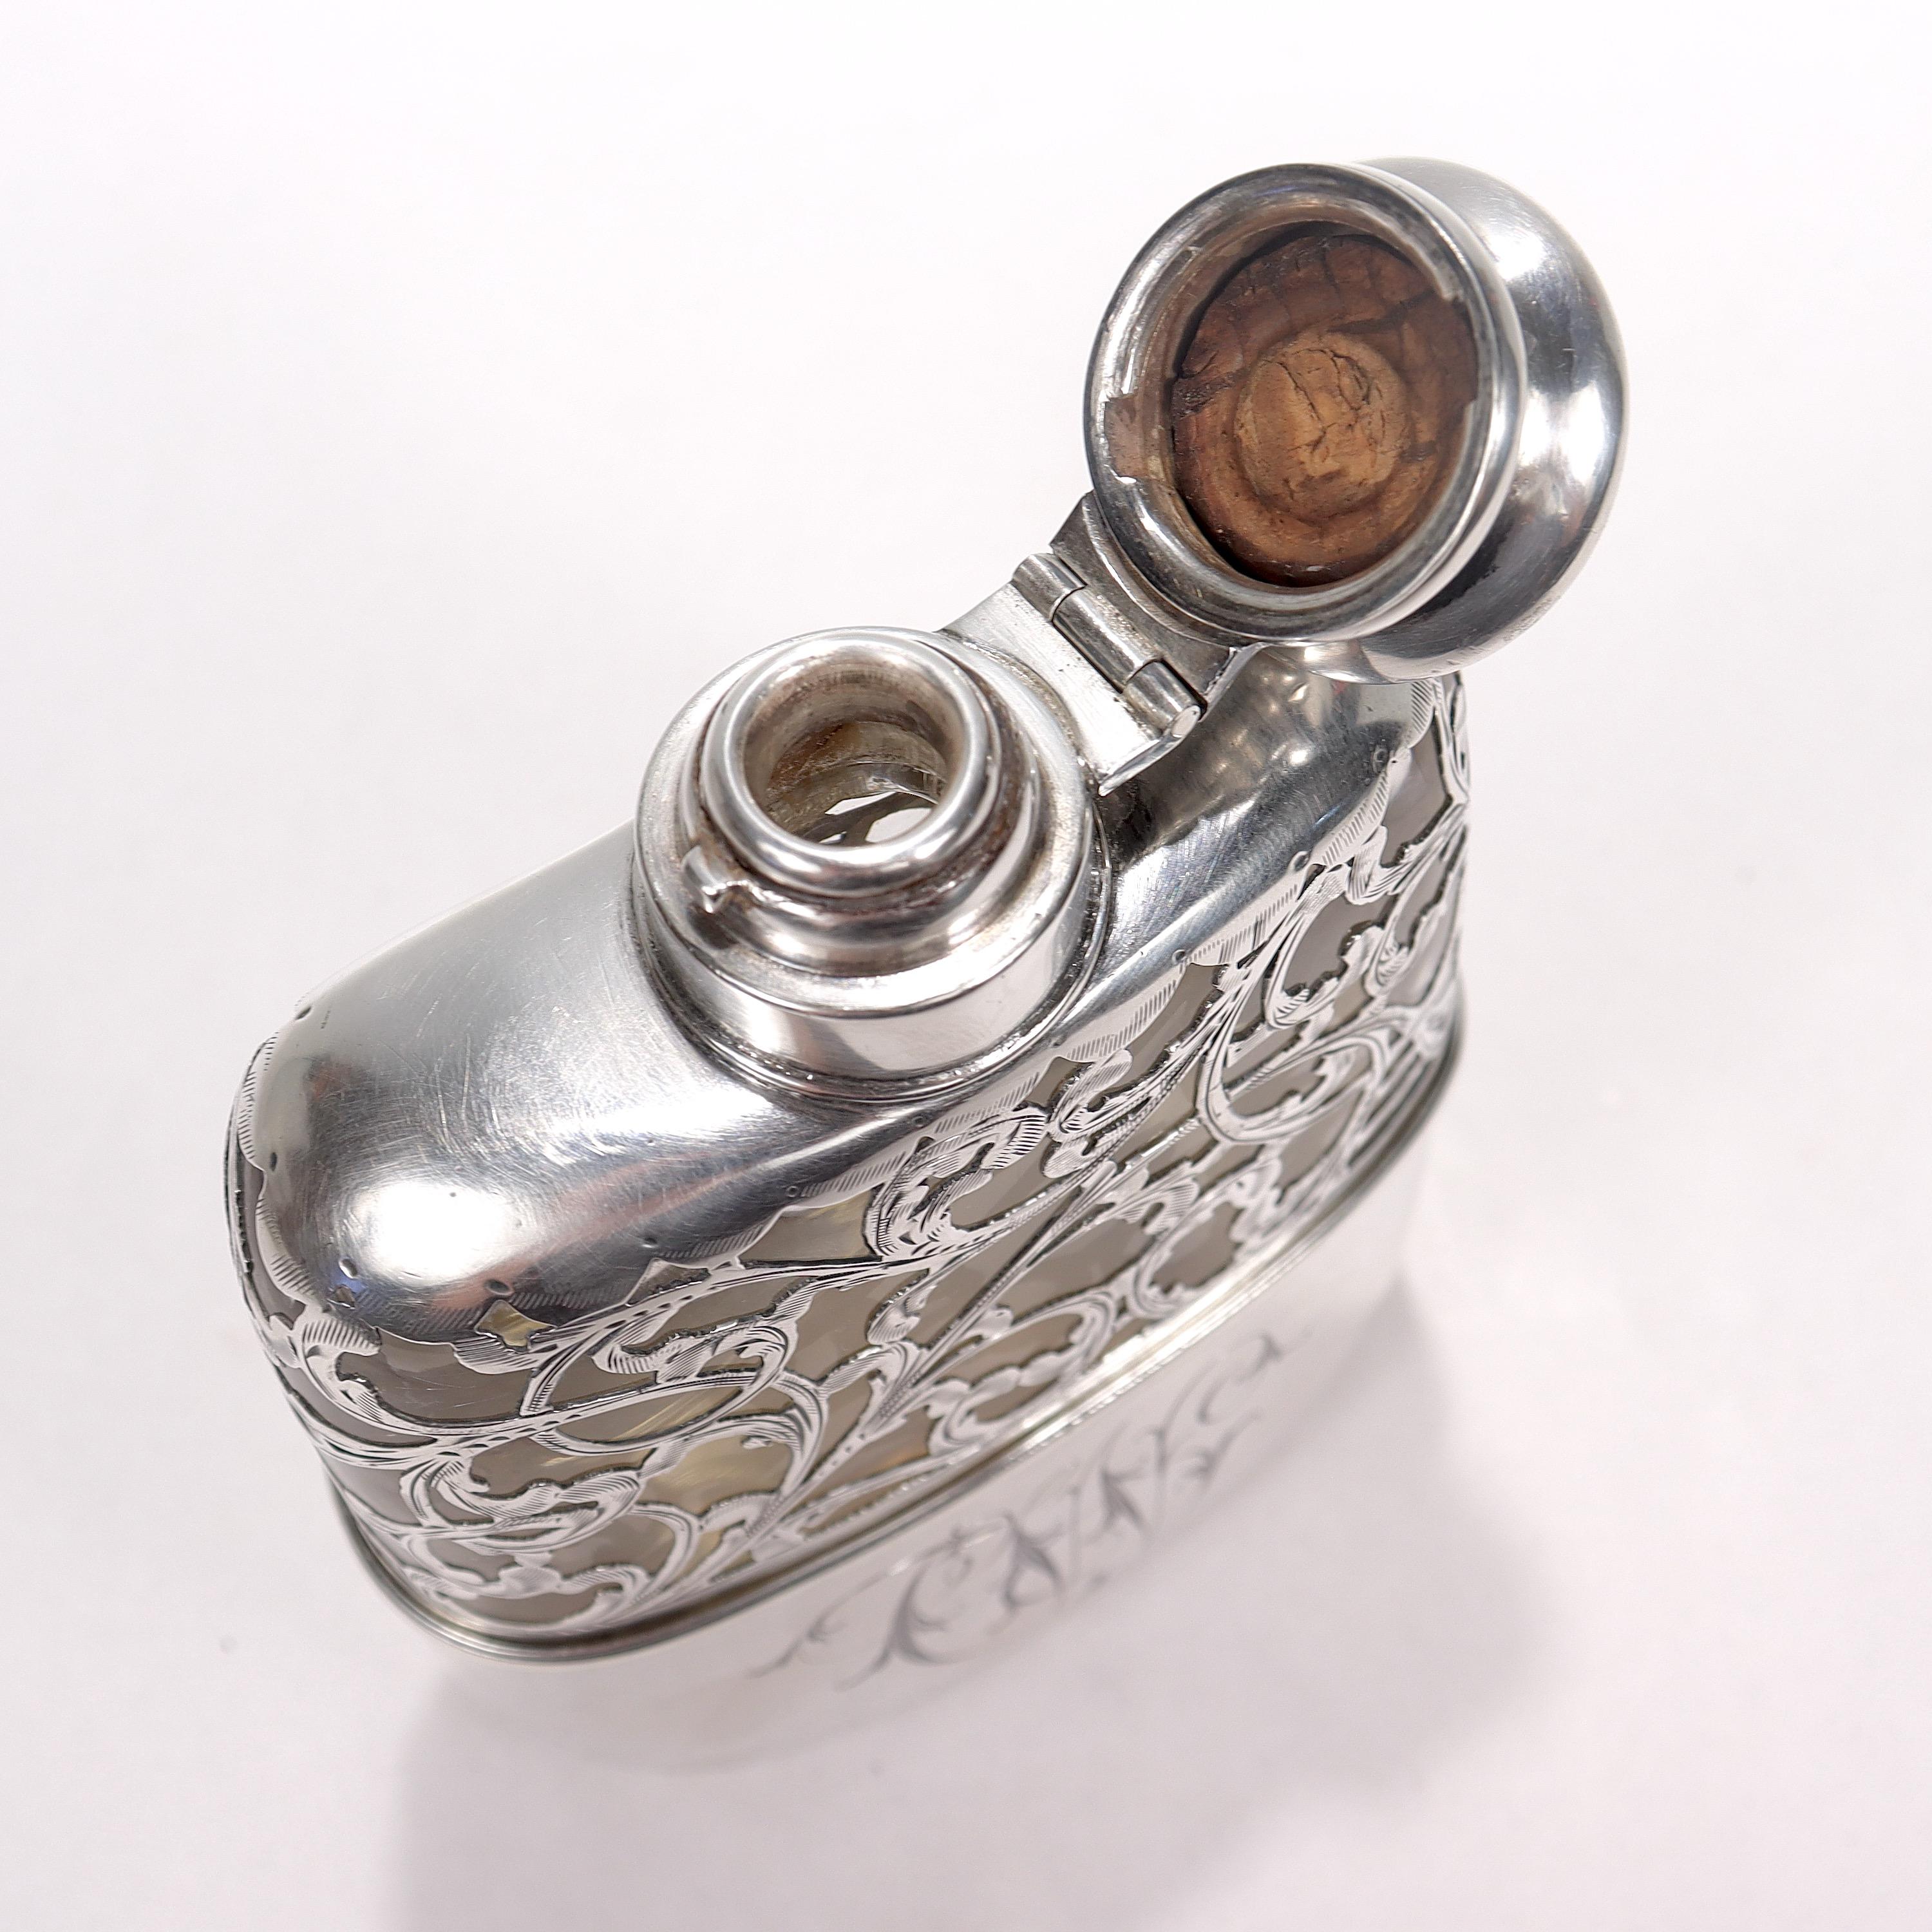 Antique Edwardian Sterling Silver Overlay Whiskey or Liquor Hip Flask 3